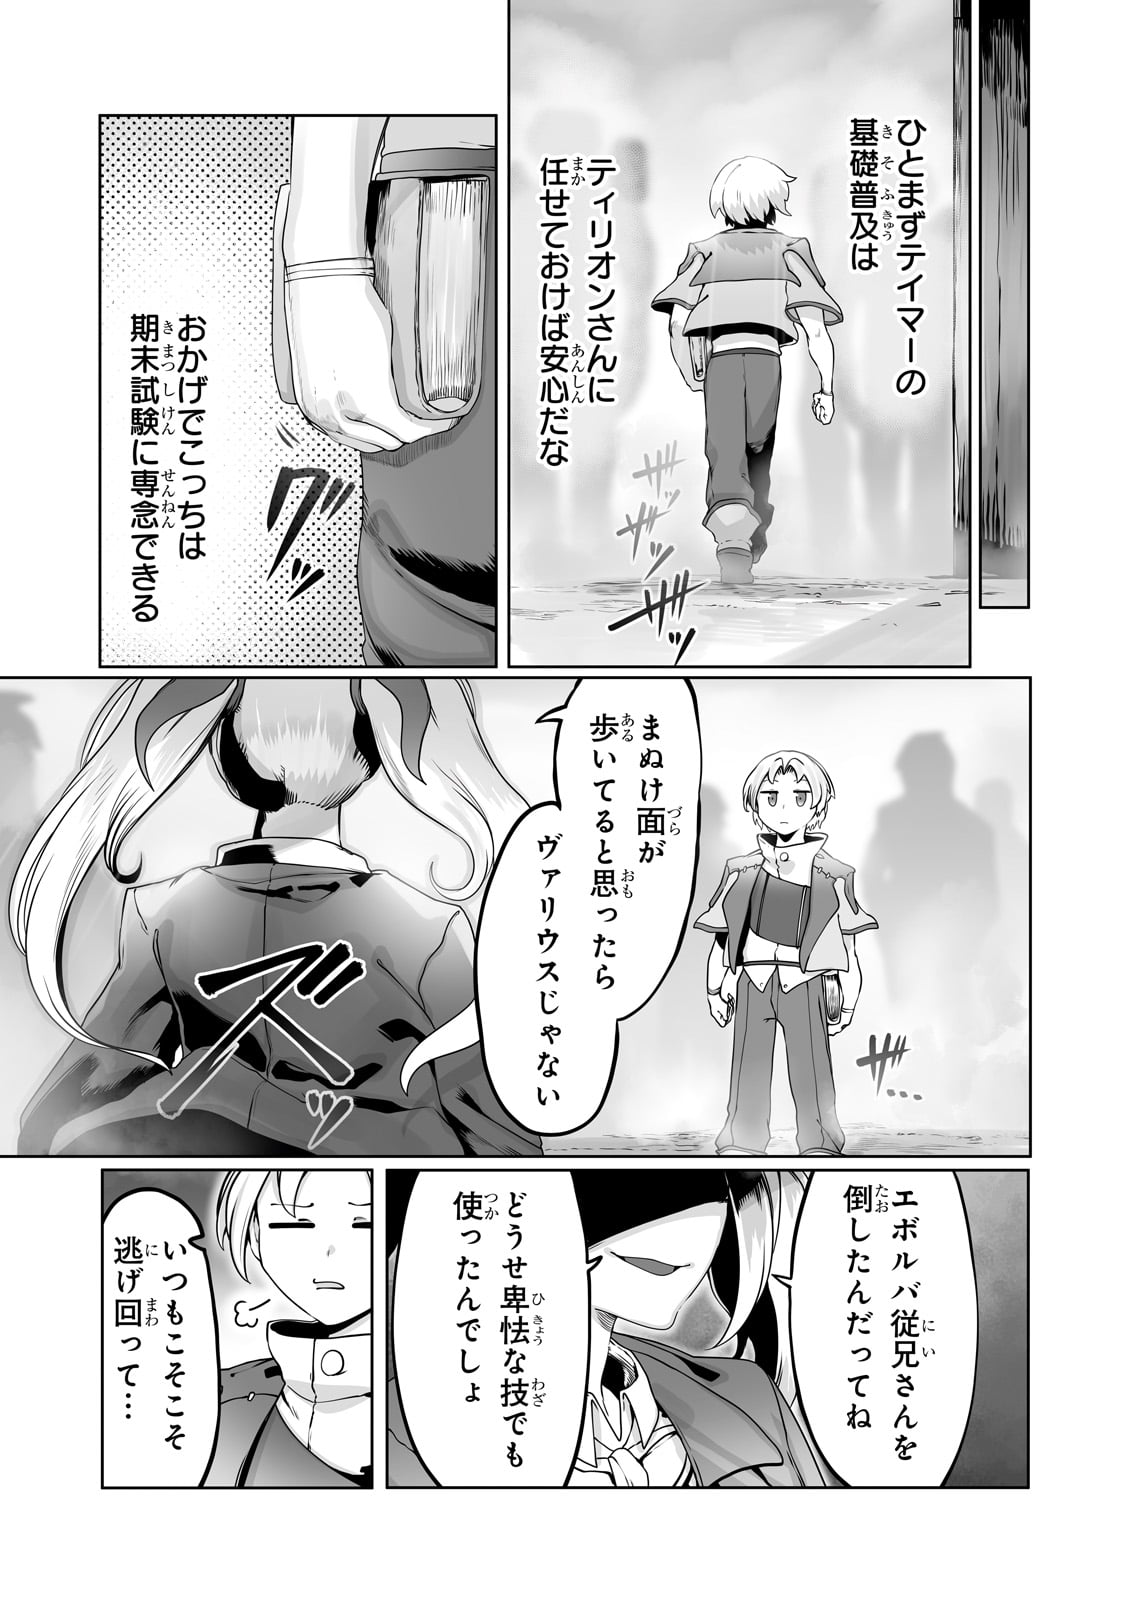 The Useless Tamer Will Turn Into the Top Unconsciously by My Previous Life Knowledge - Chapter 33 - Page 23